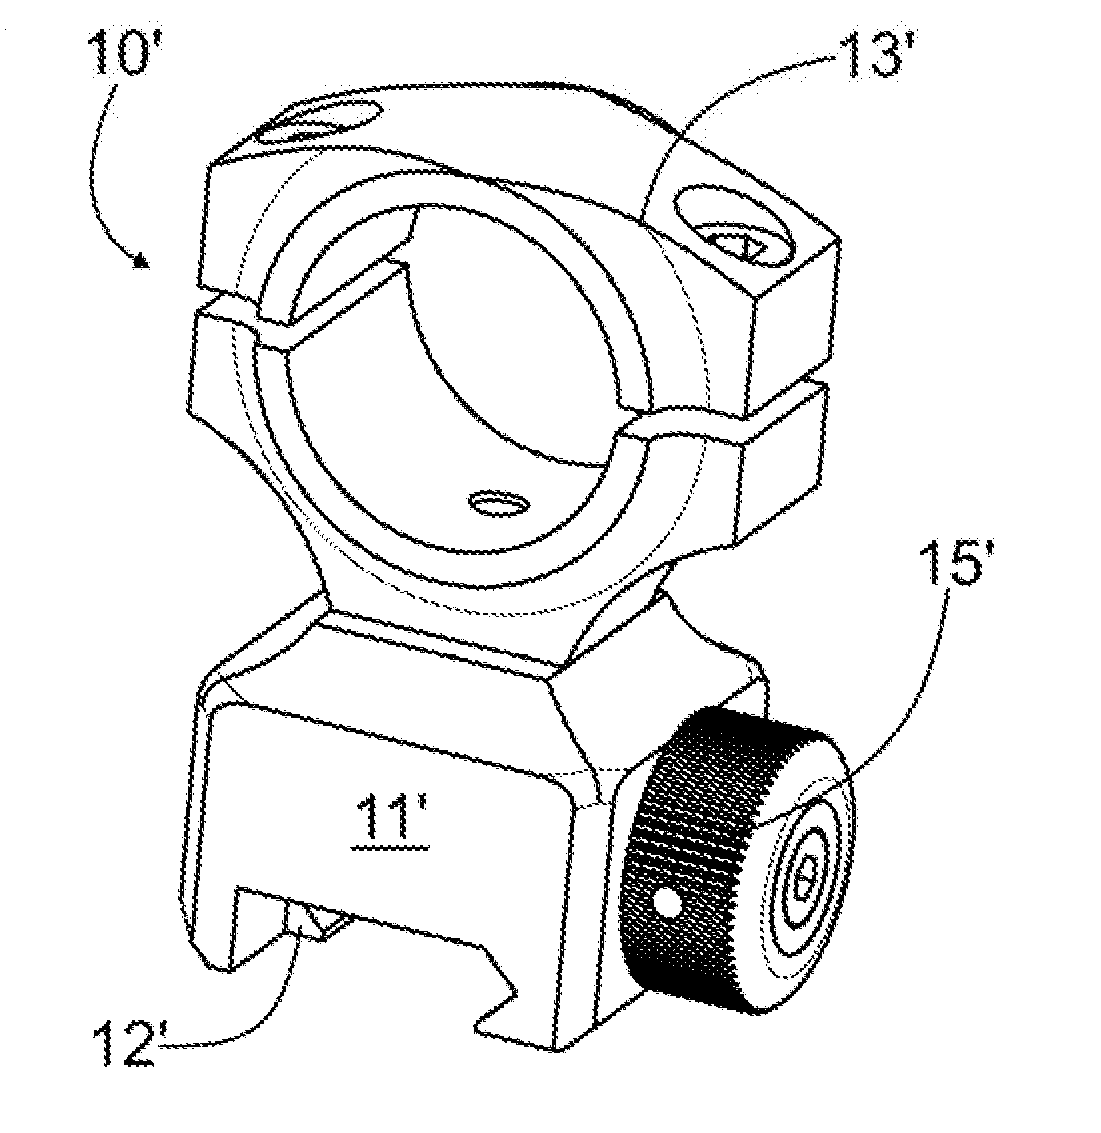 Support for mounting an accessory to a weapon